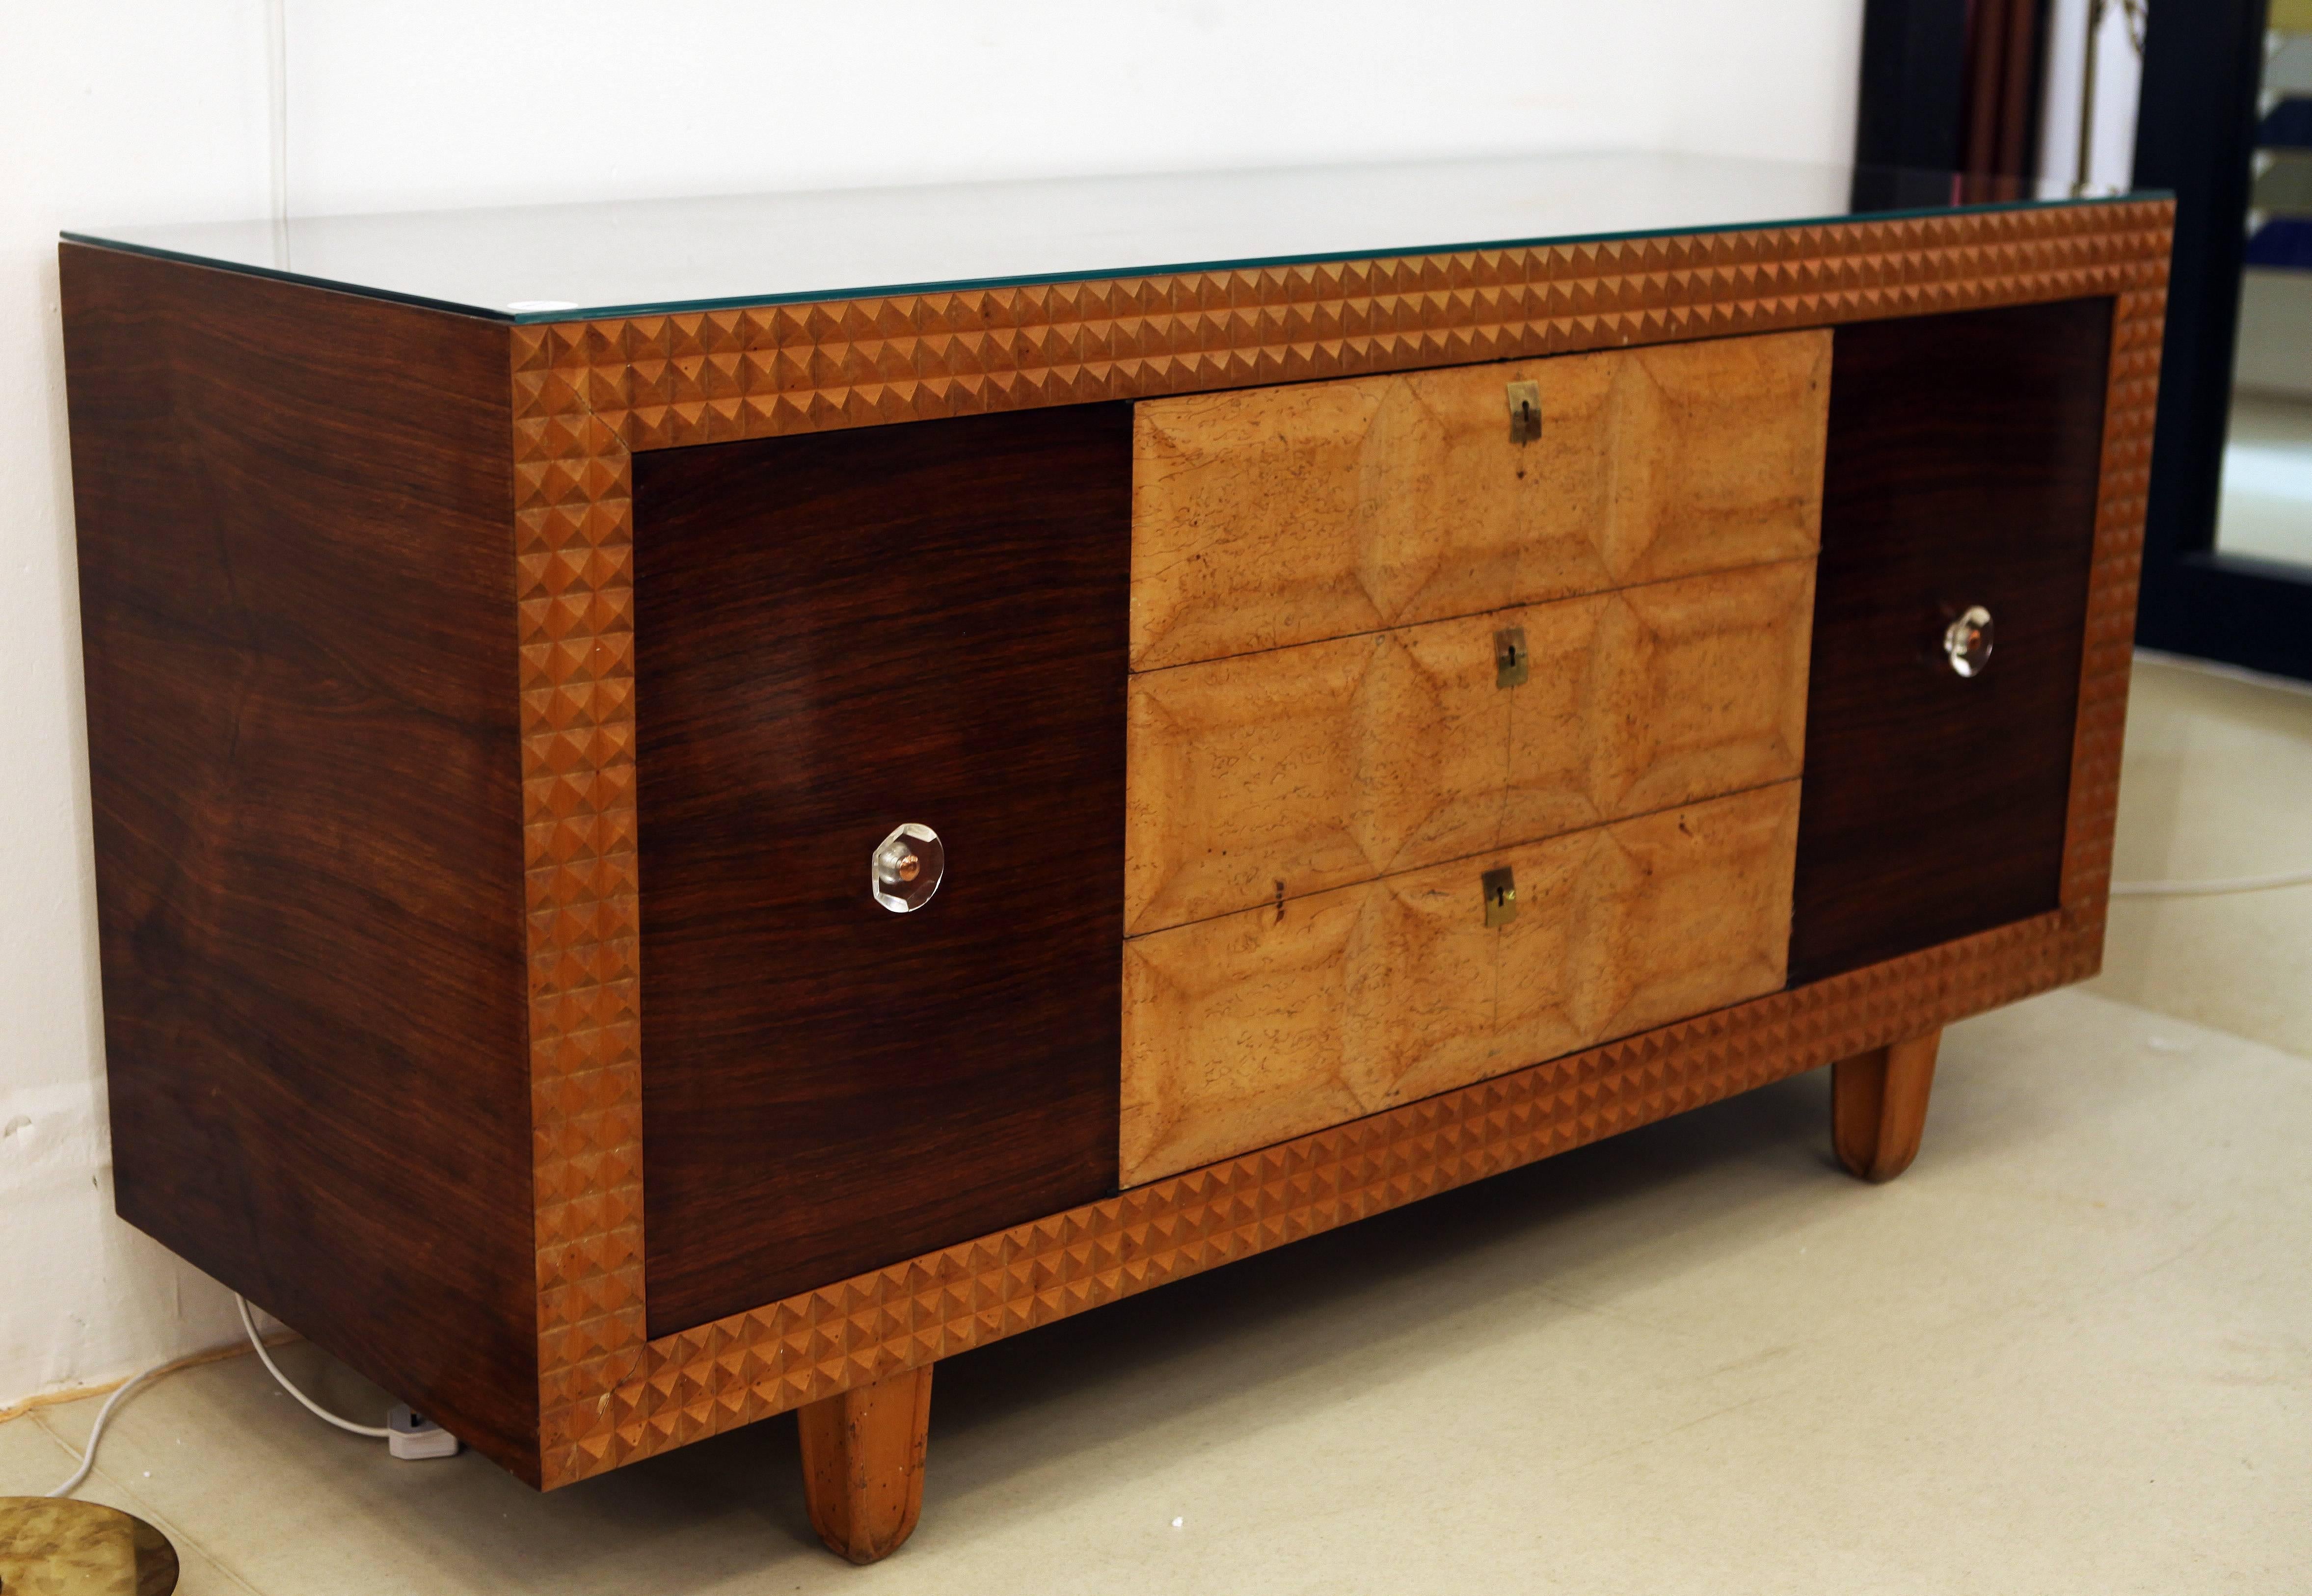 A superb Italian designed credenza or buffet crafted in exotic woods of Rosewood walnut and mahogany. Framed with raised geometric marquetry with similar work on the drawers the use of the three exotic woods creates great contrast beautifully